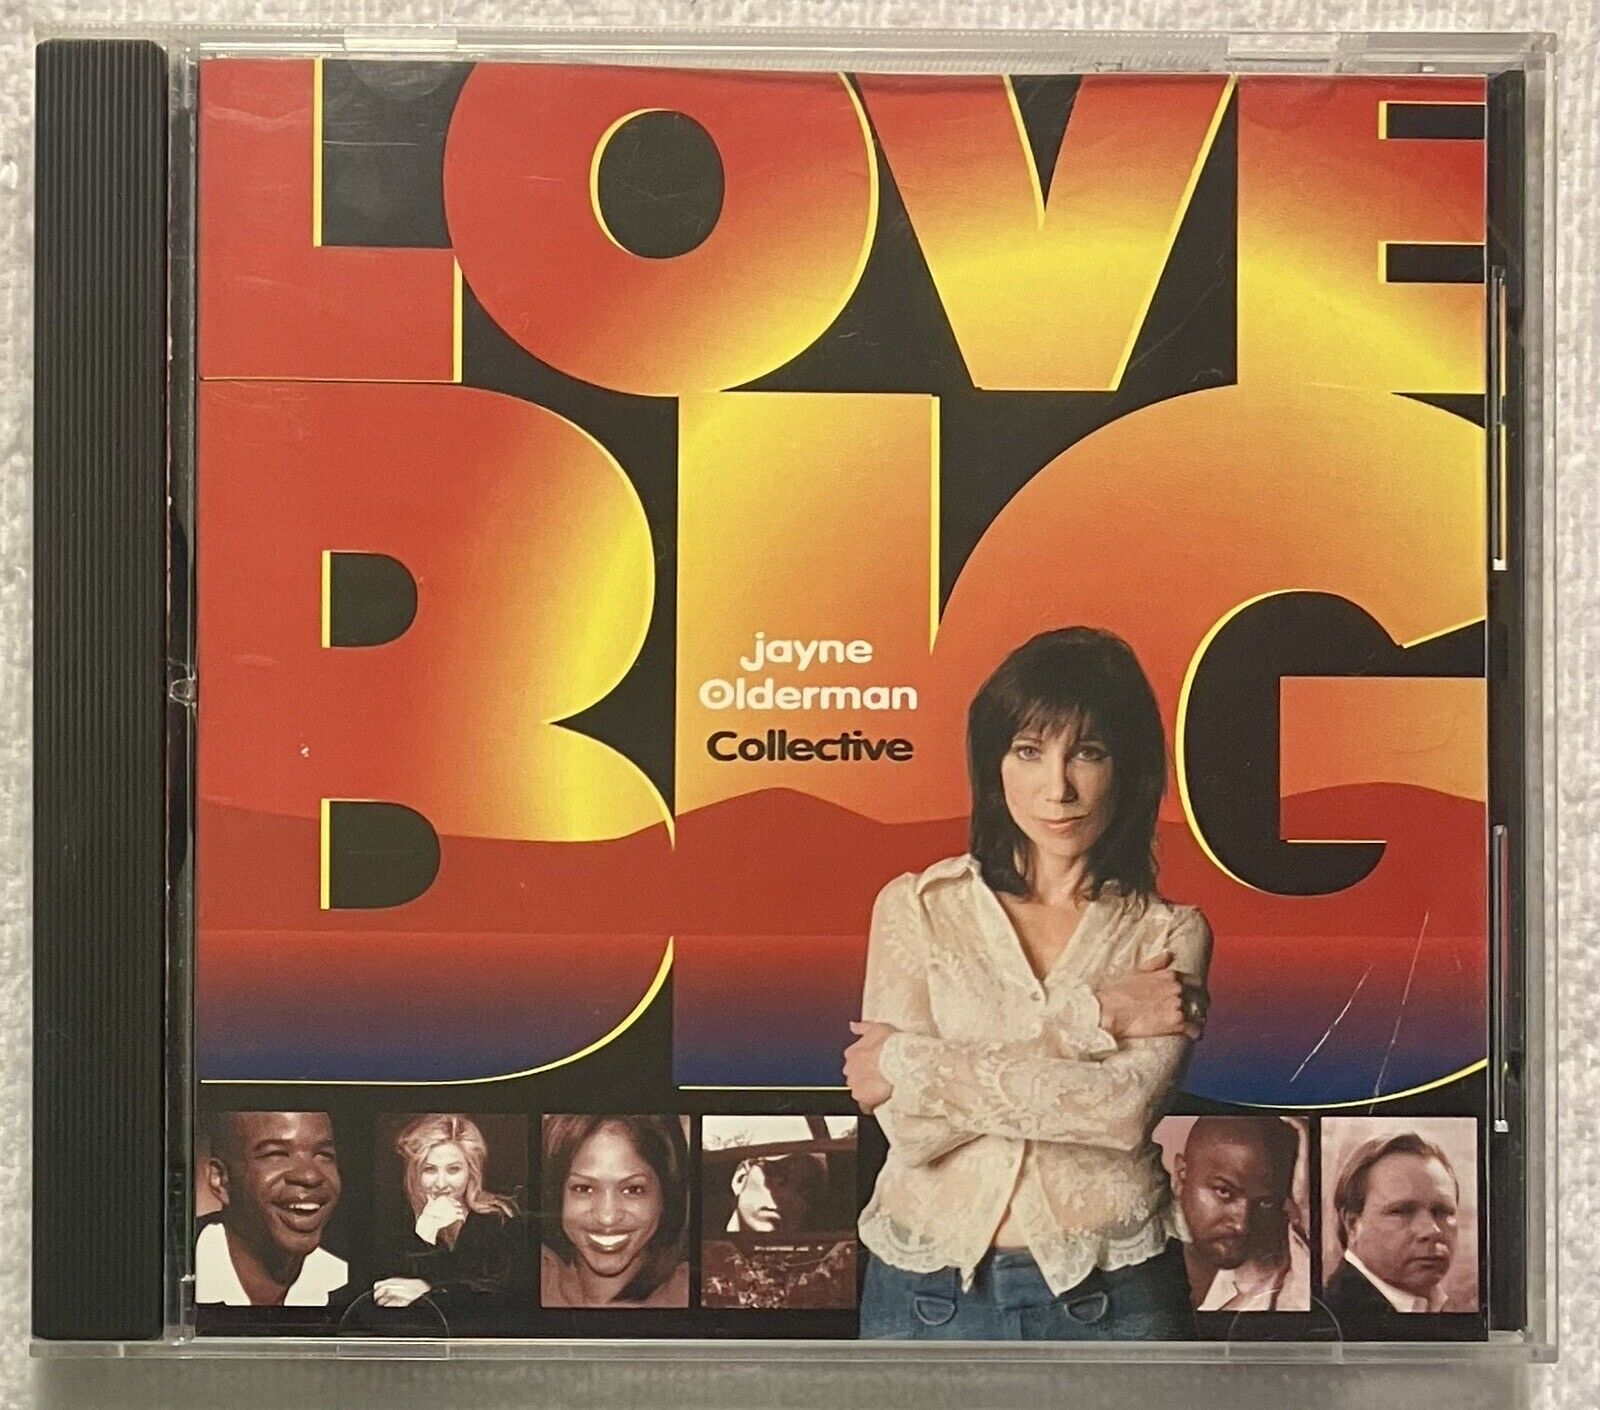 Love Big by Jayne Olderman Collective (CD) Red Warrior Records